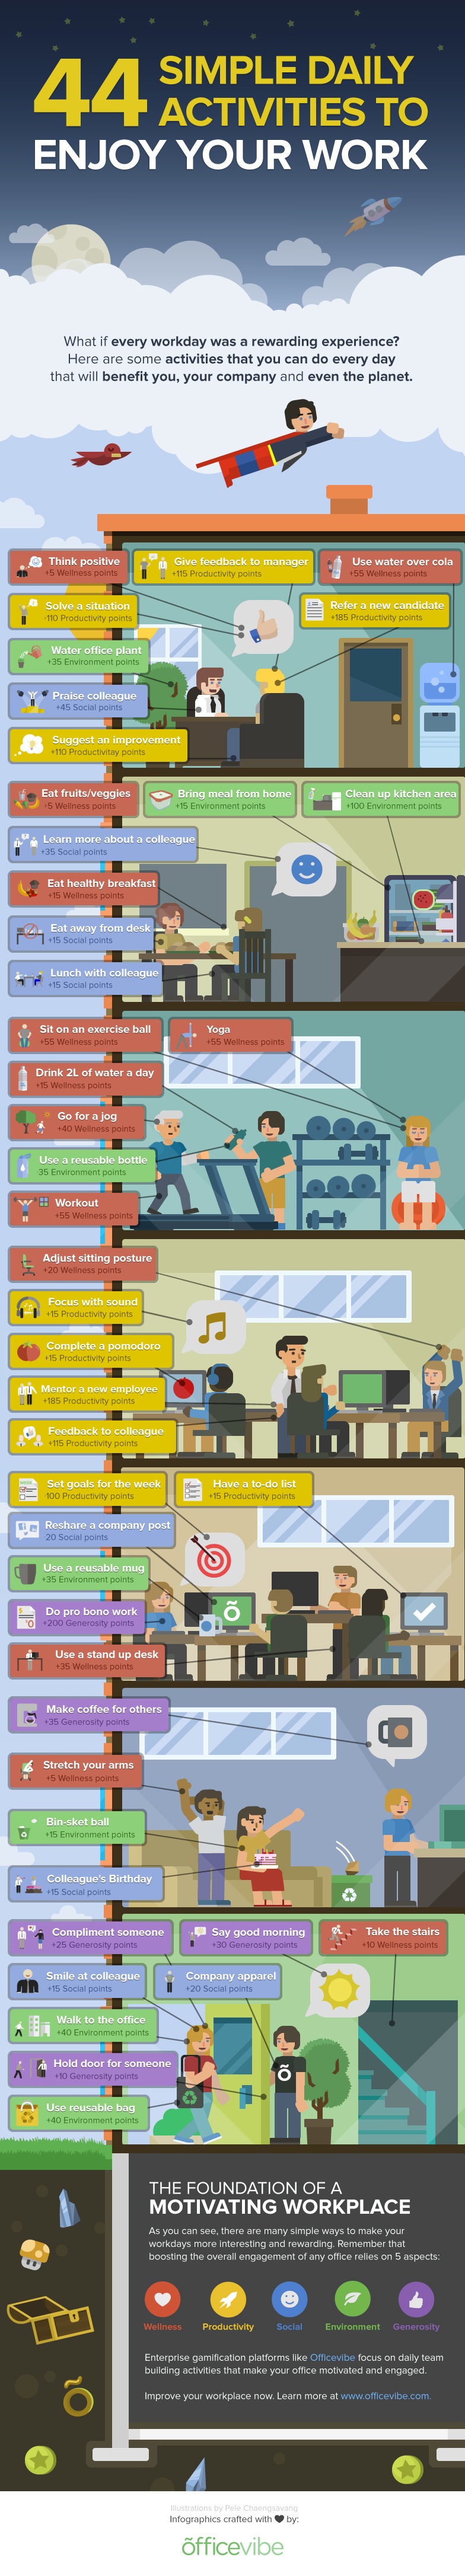 44 Team Building Activities for Work Infographic